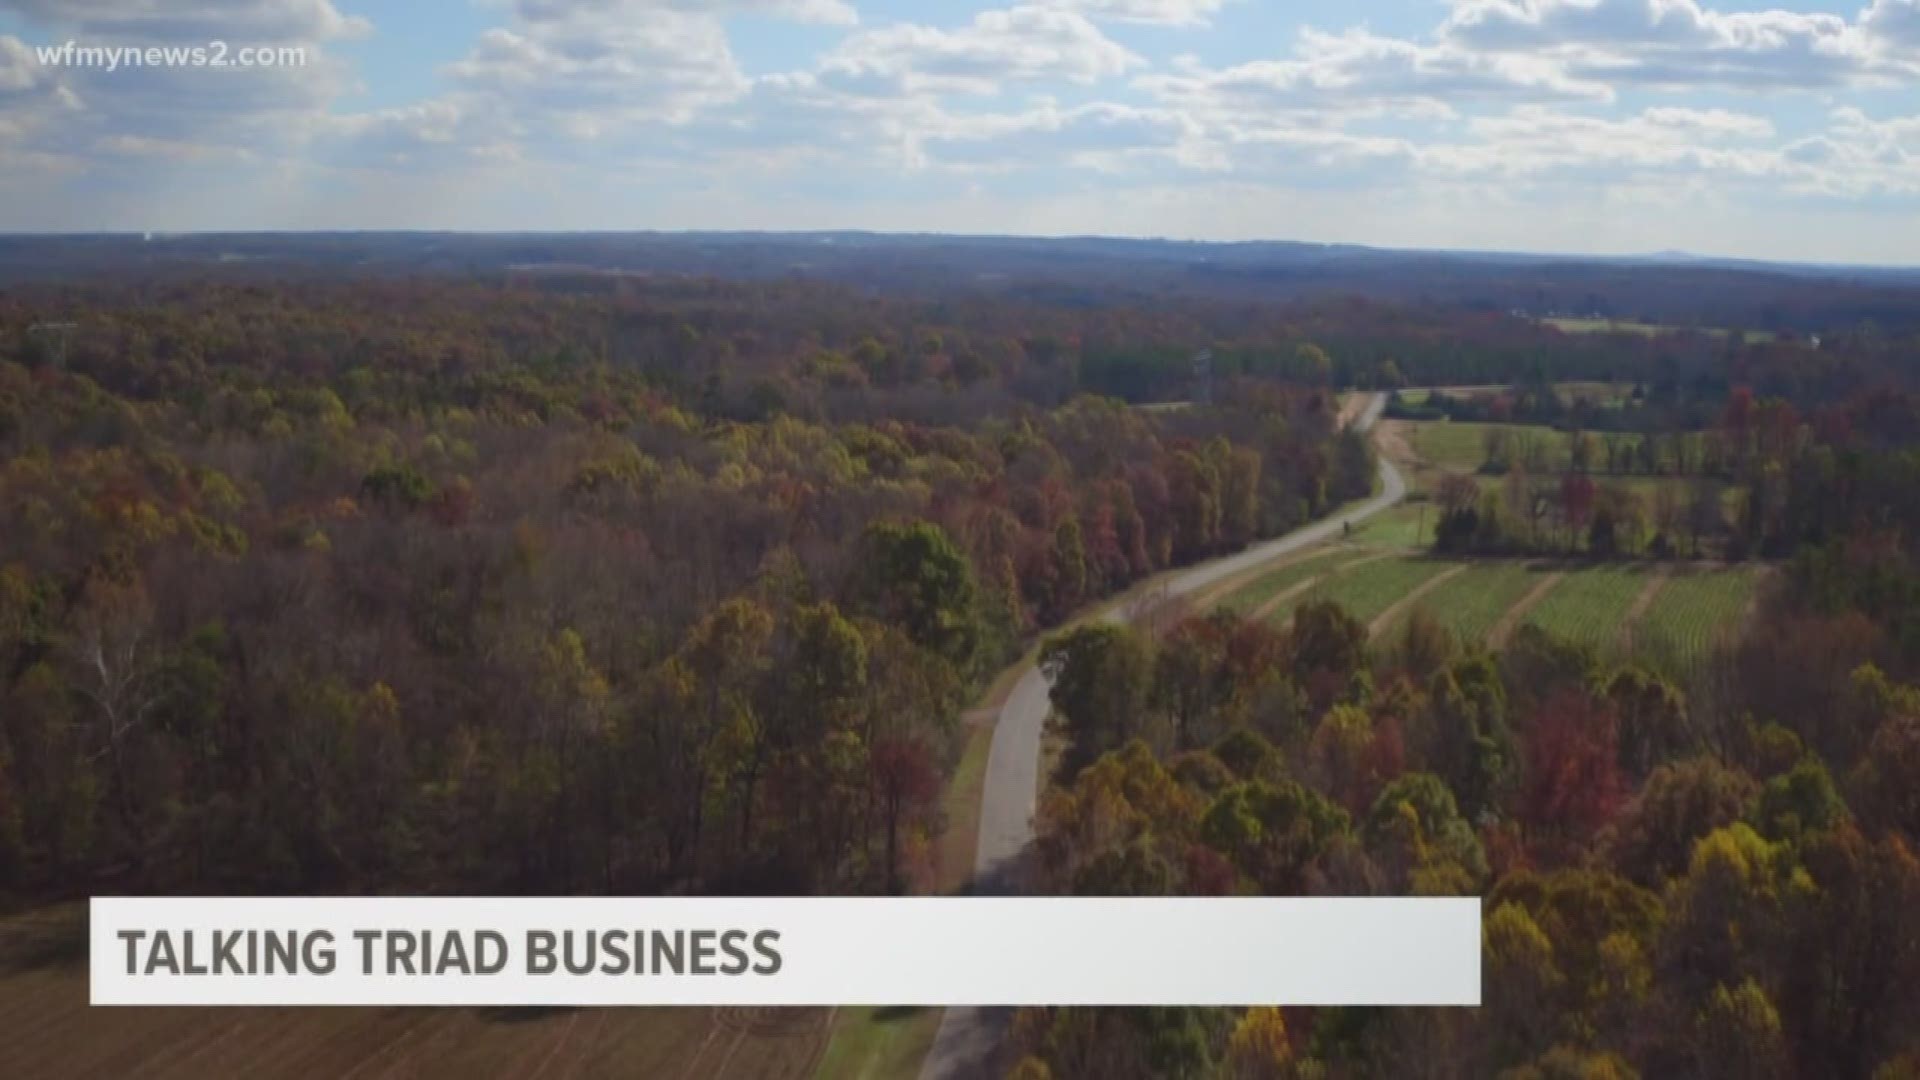 Triad Business journal joins us in the WFMY studio to talk about the new developments coming to your community. They include thousands of jobs up for grabs, a new commercial investment firm setting up shop, and a new grocery store bring life to a shopping center.